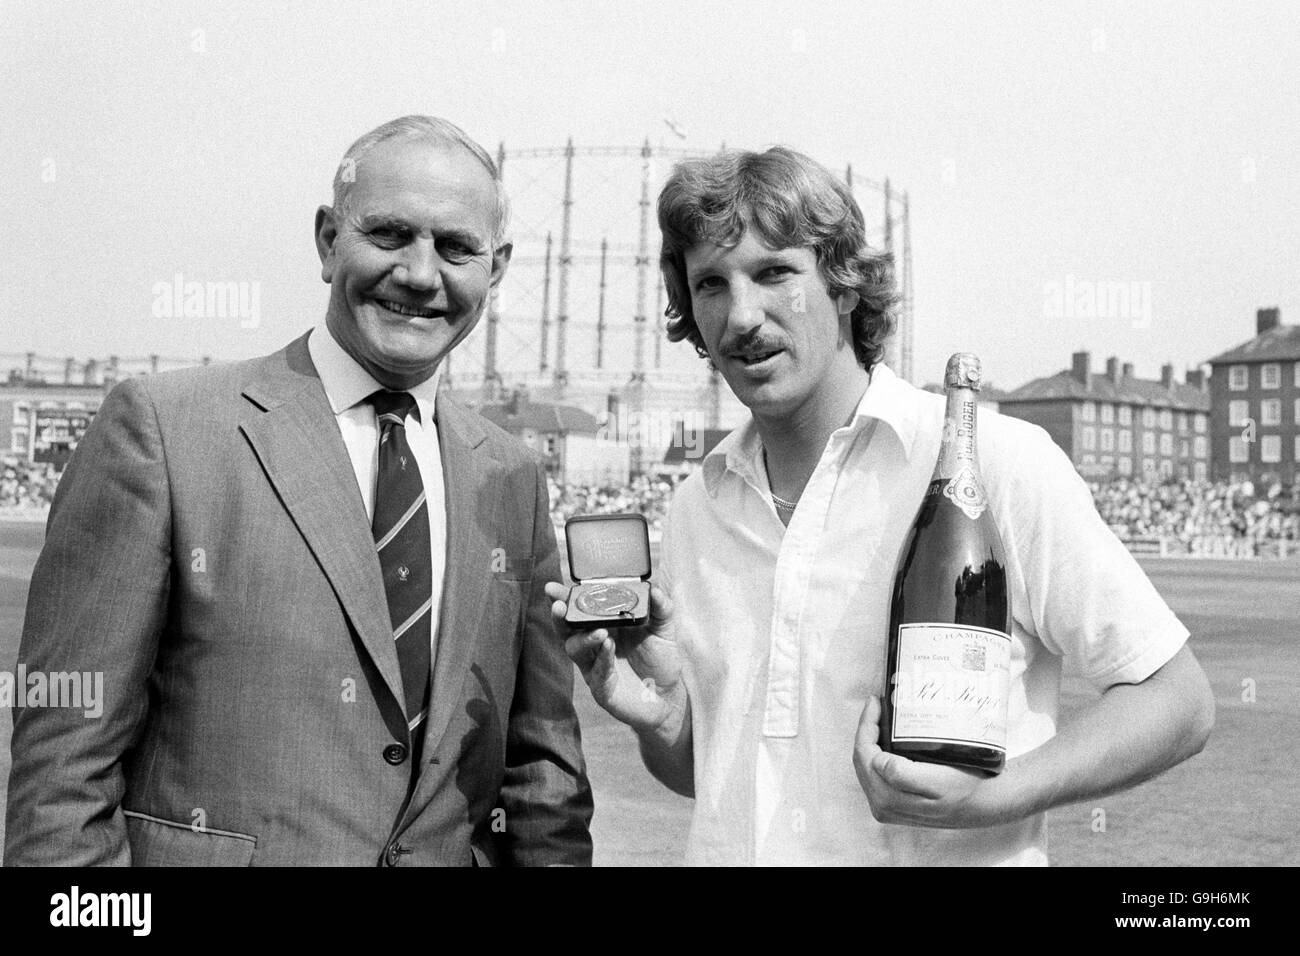 England's Ian Botham (r), who completed the fastest test double of 1000 runs and 100 wickets on the first day's play, is presented with a special Cornhill medallion and a magnum of champagne by Alec Bedser (l), chairman of the England test selectors Stock Photo